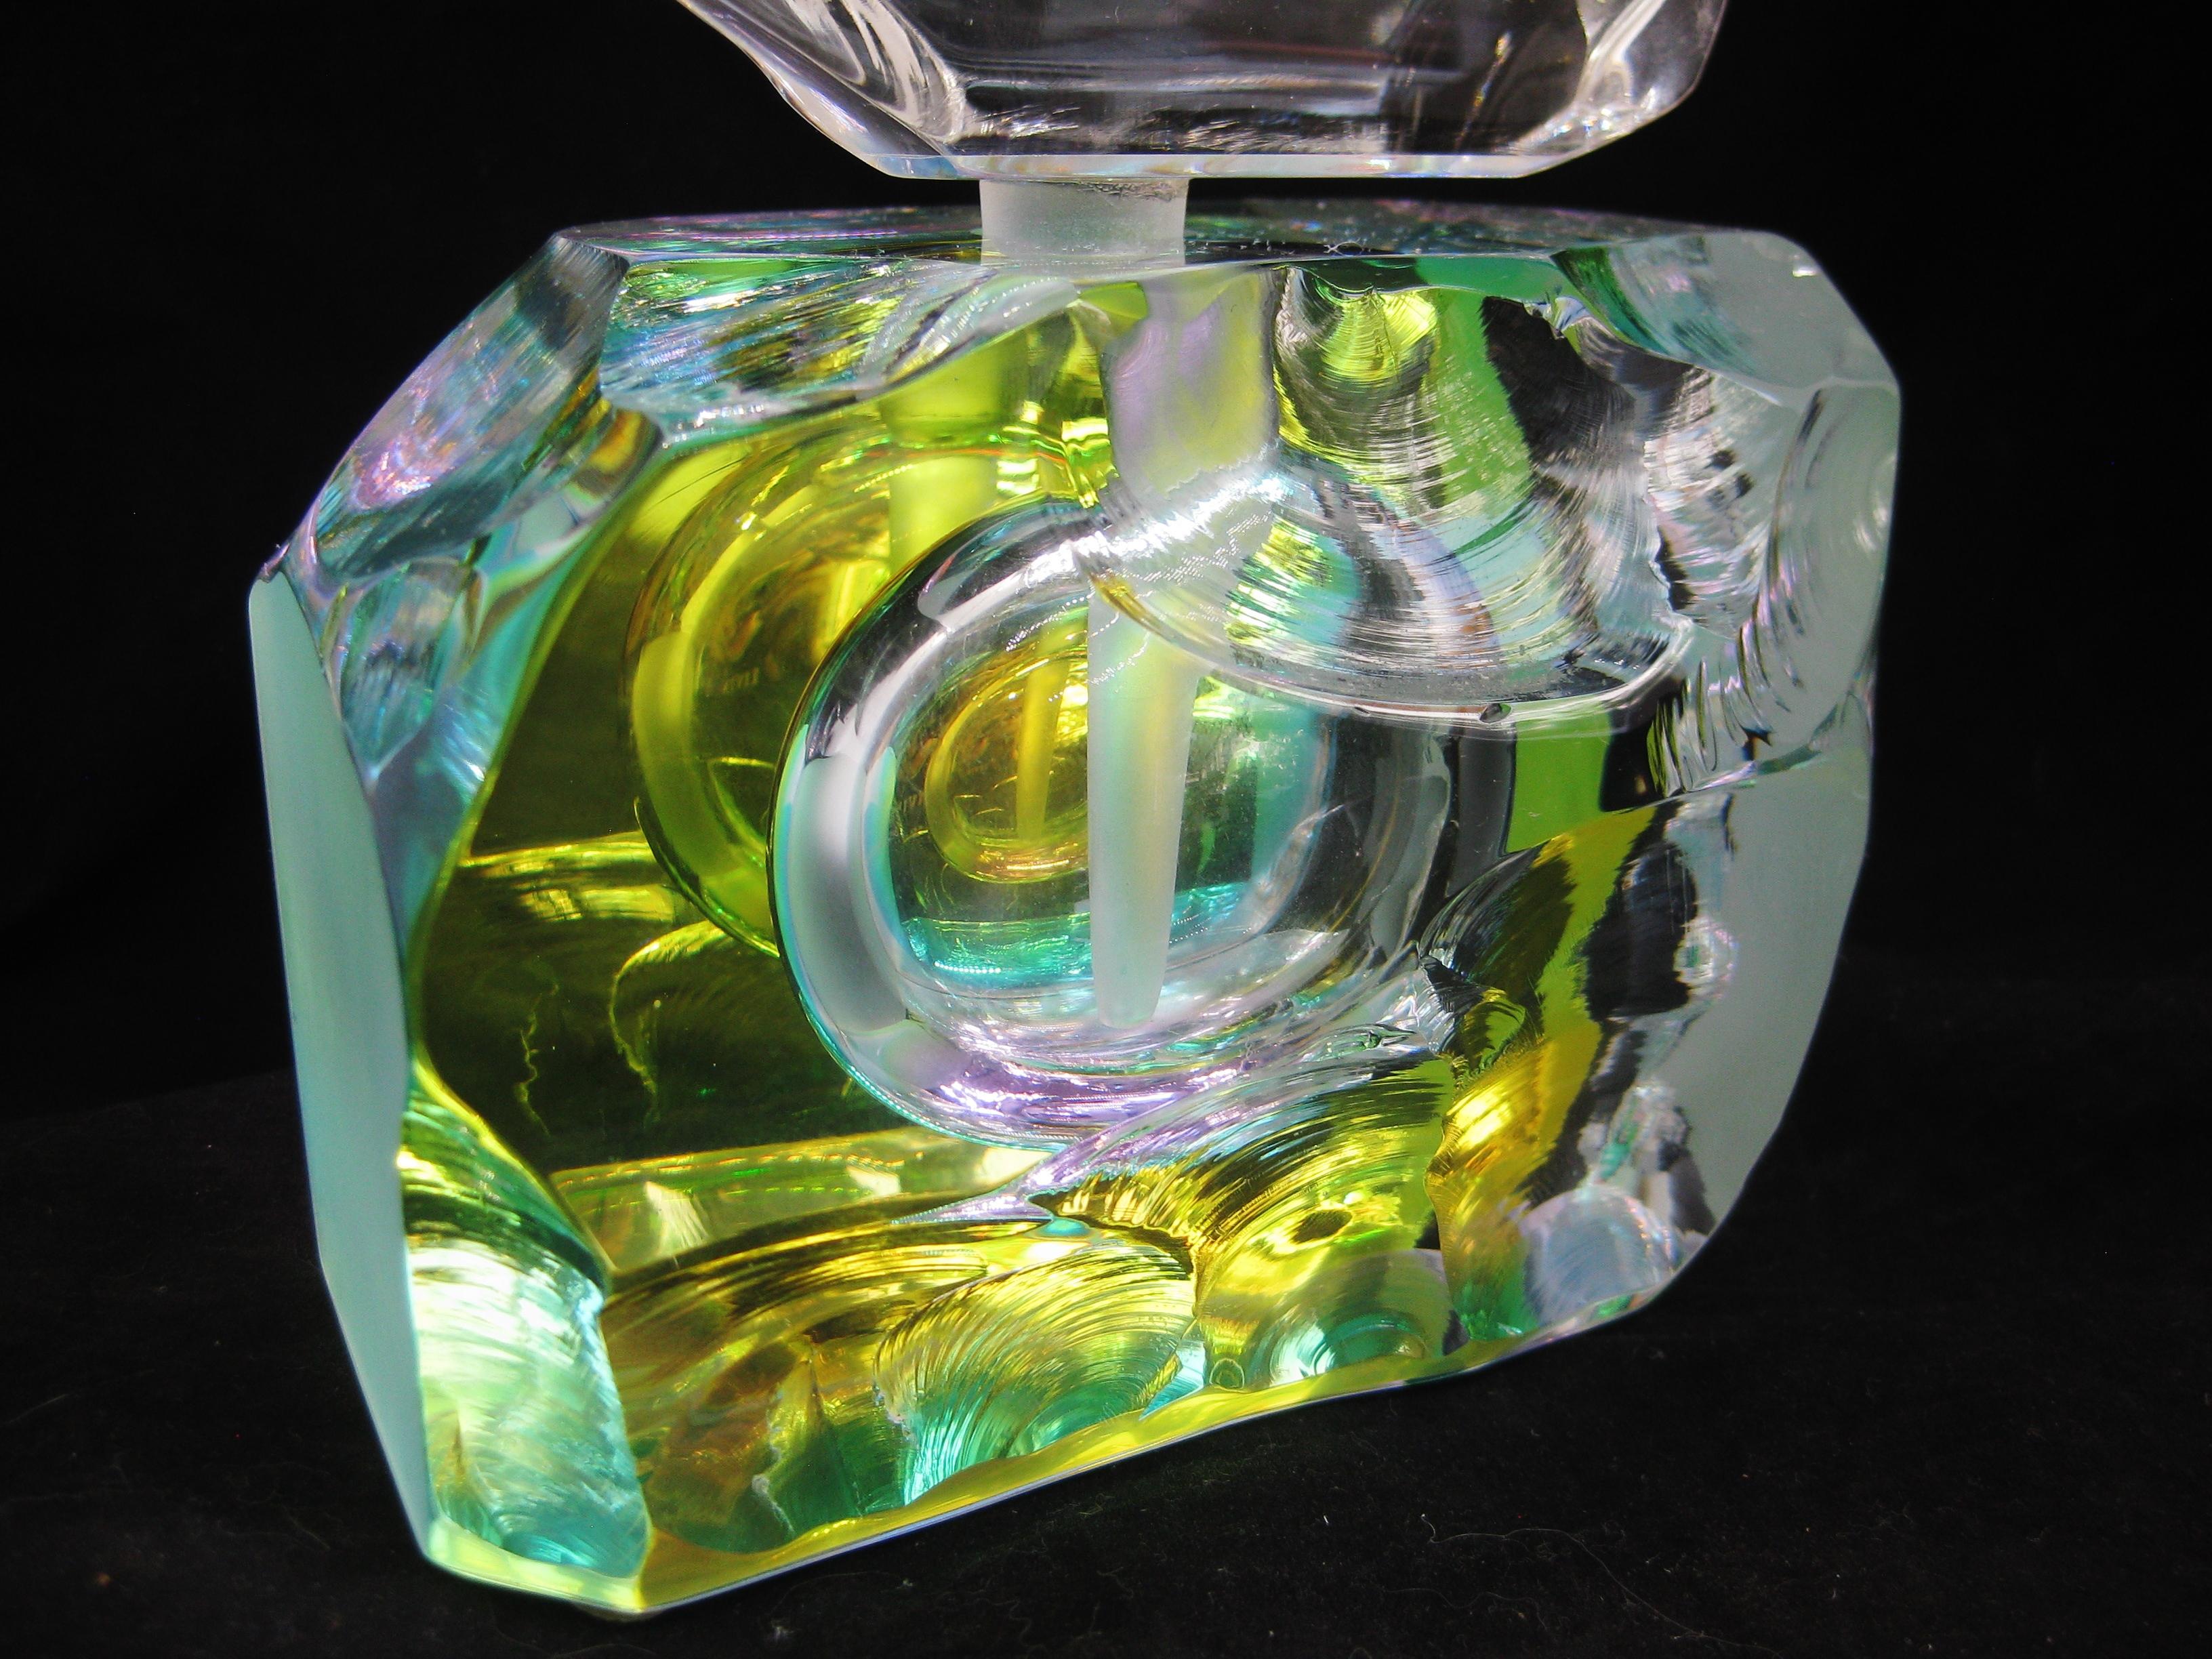 Stunning large studio art glass abstract dichroic perfume bottle by artist Steven M. Maslach. The perfume bottle is signed on the bottom and dates from 1993. The perfume bottle has a wonderful iridescent surface that changes colors in different